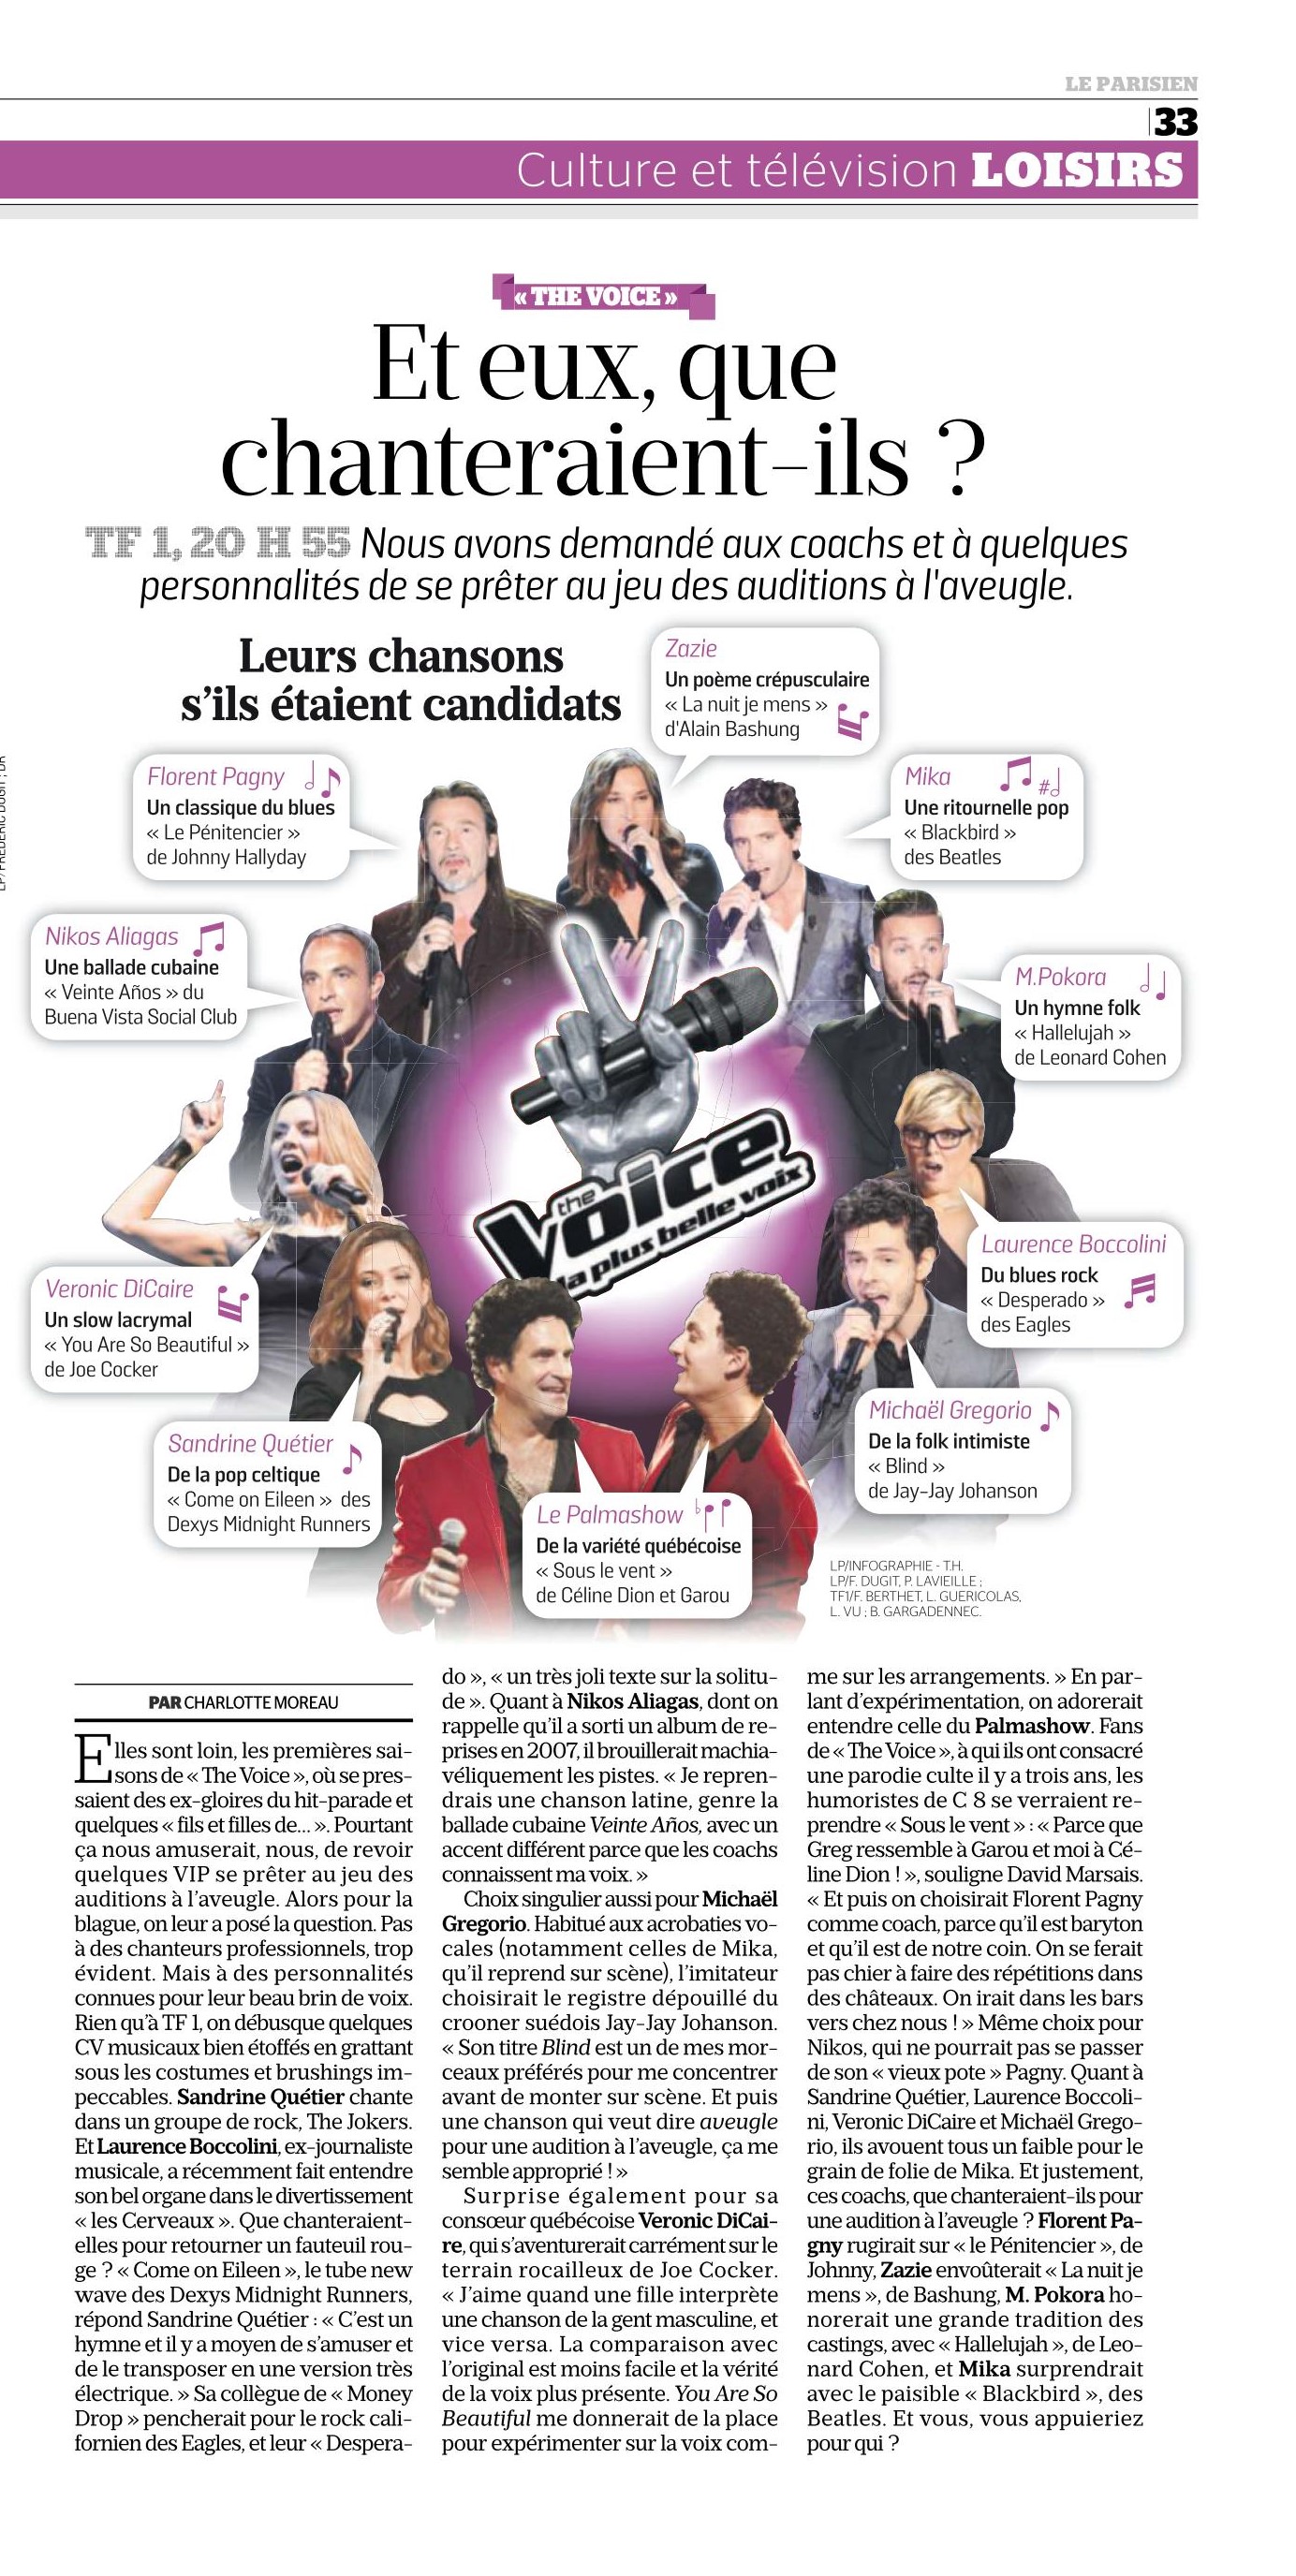 The Voice 2017 - Presse - Page 2 32991025442_04a56d9bb2_o